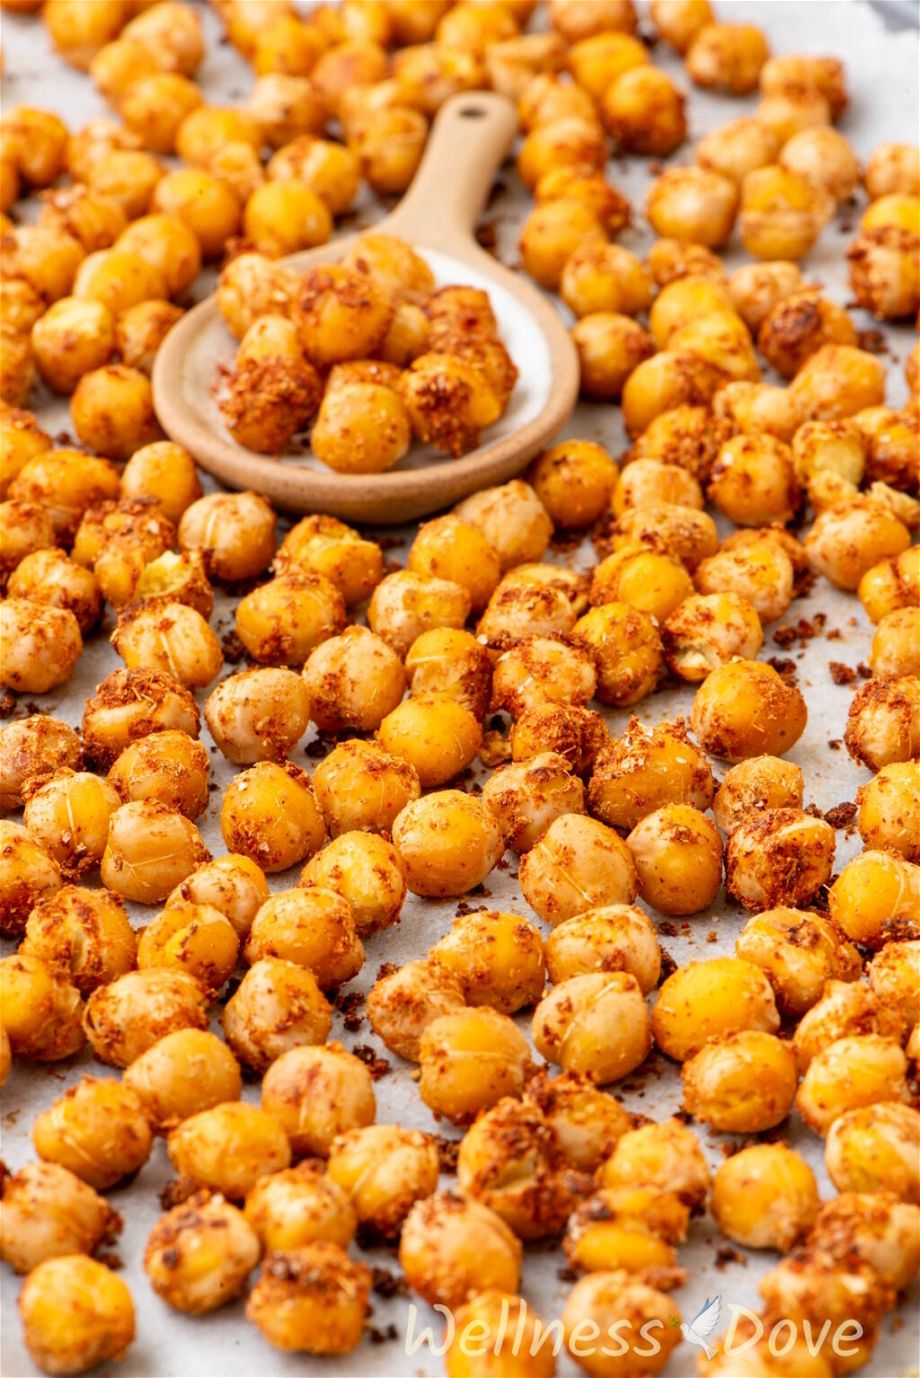 a close up photo of the Oil-free Oven Roasted Chickpeas in a baking tray